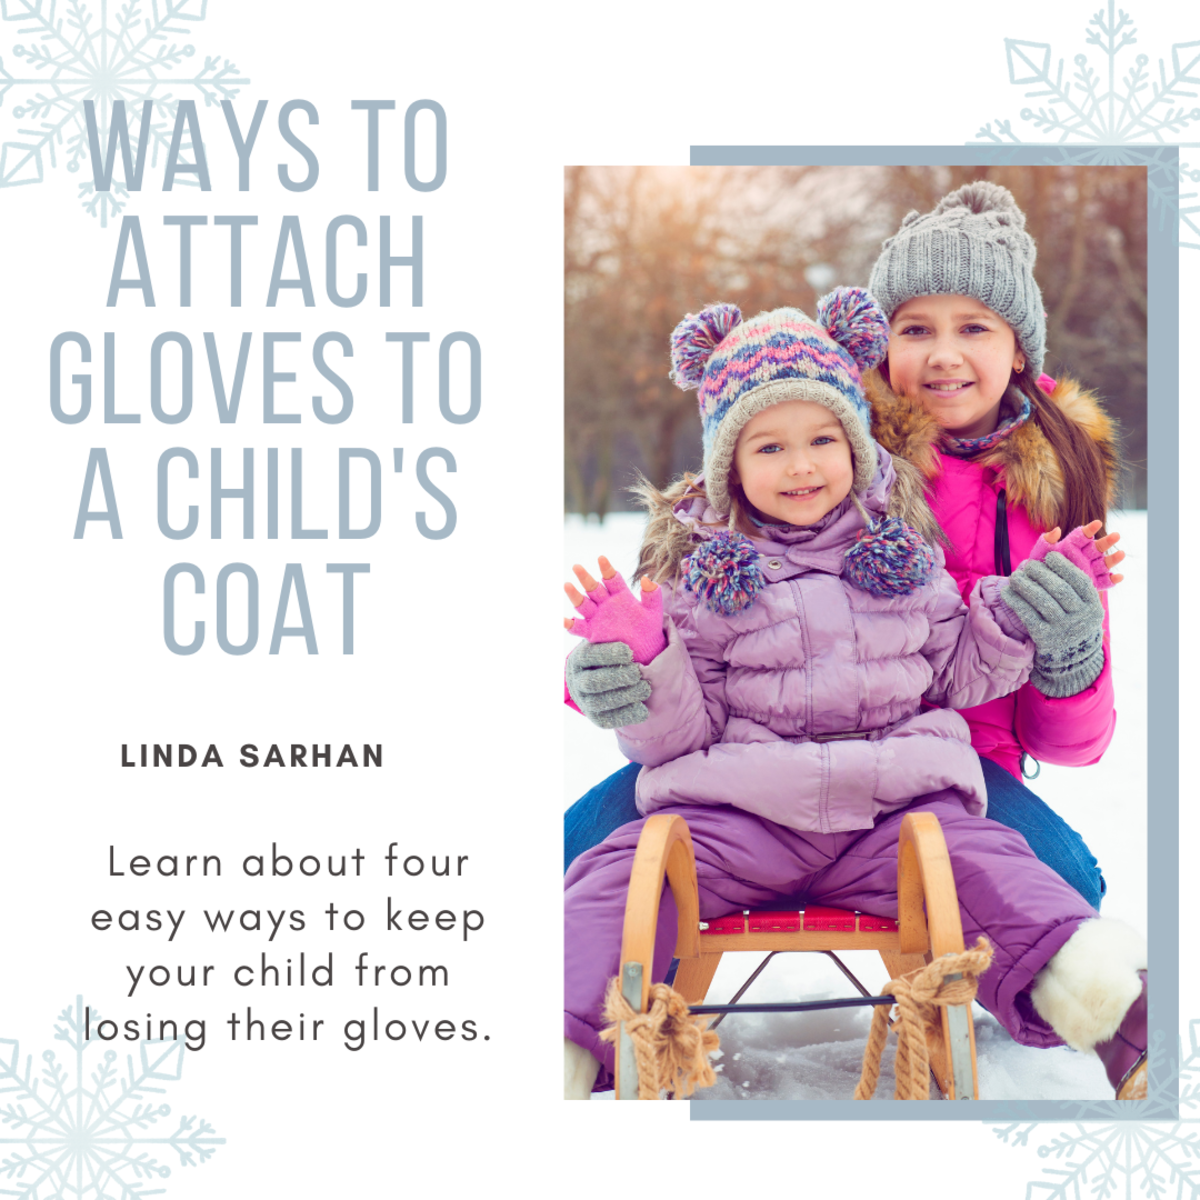 How to attach gloves to a child's coat.